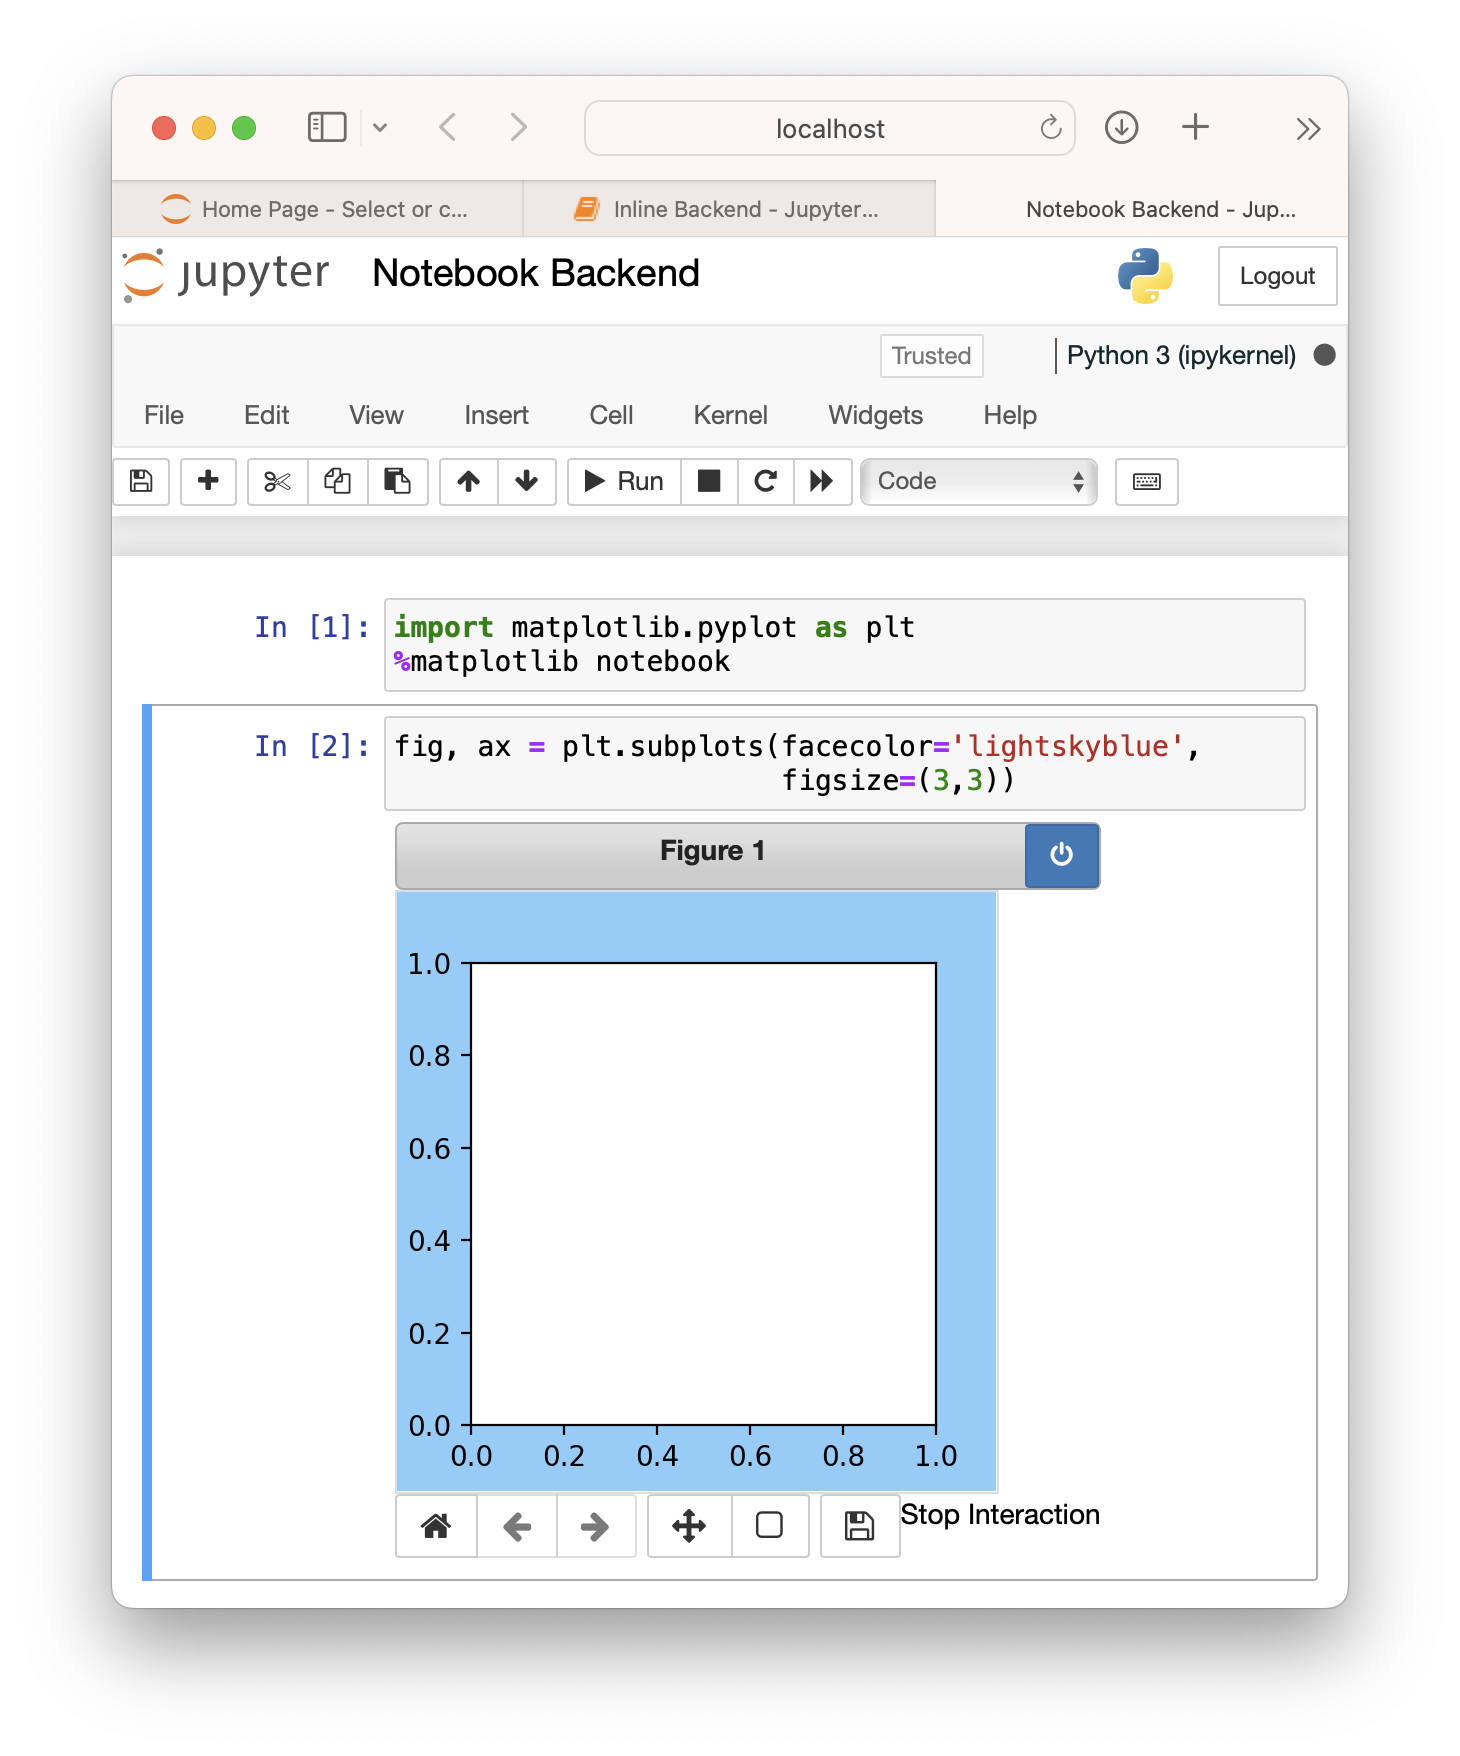 Image of figure generated in Jupyter Notebook with notebook backend, including a toolbar.